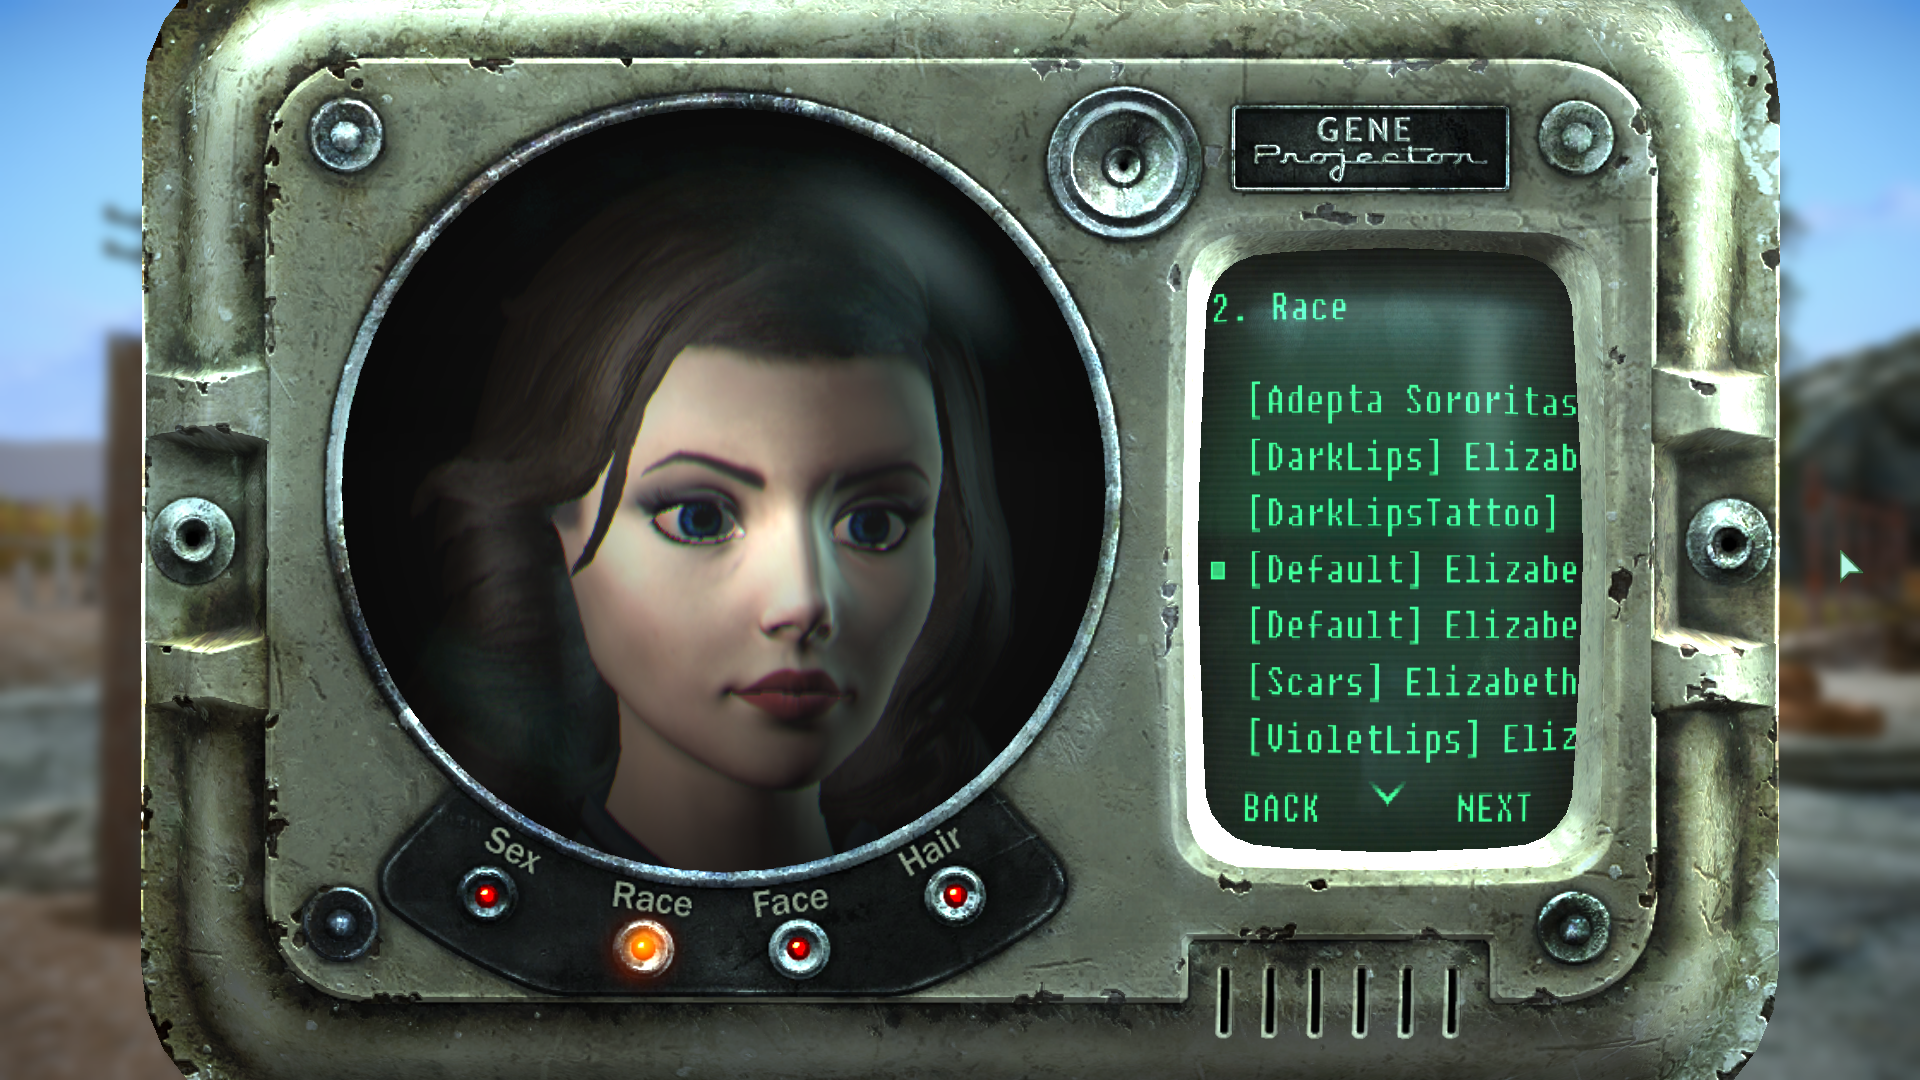 fallout 3 female character creation no mods